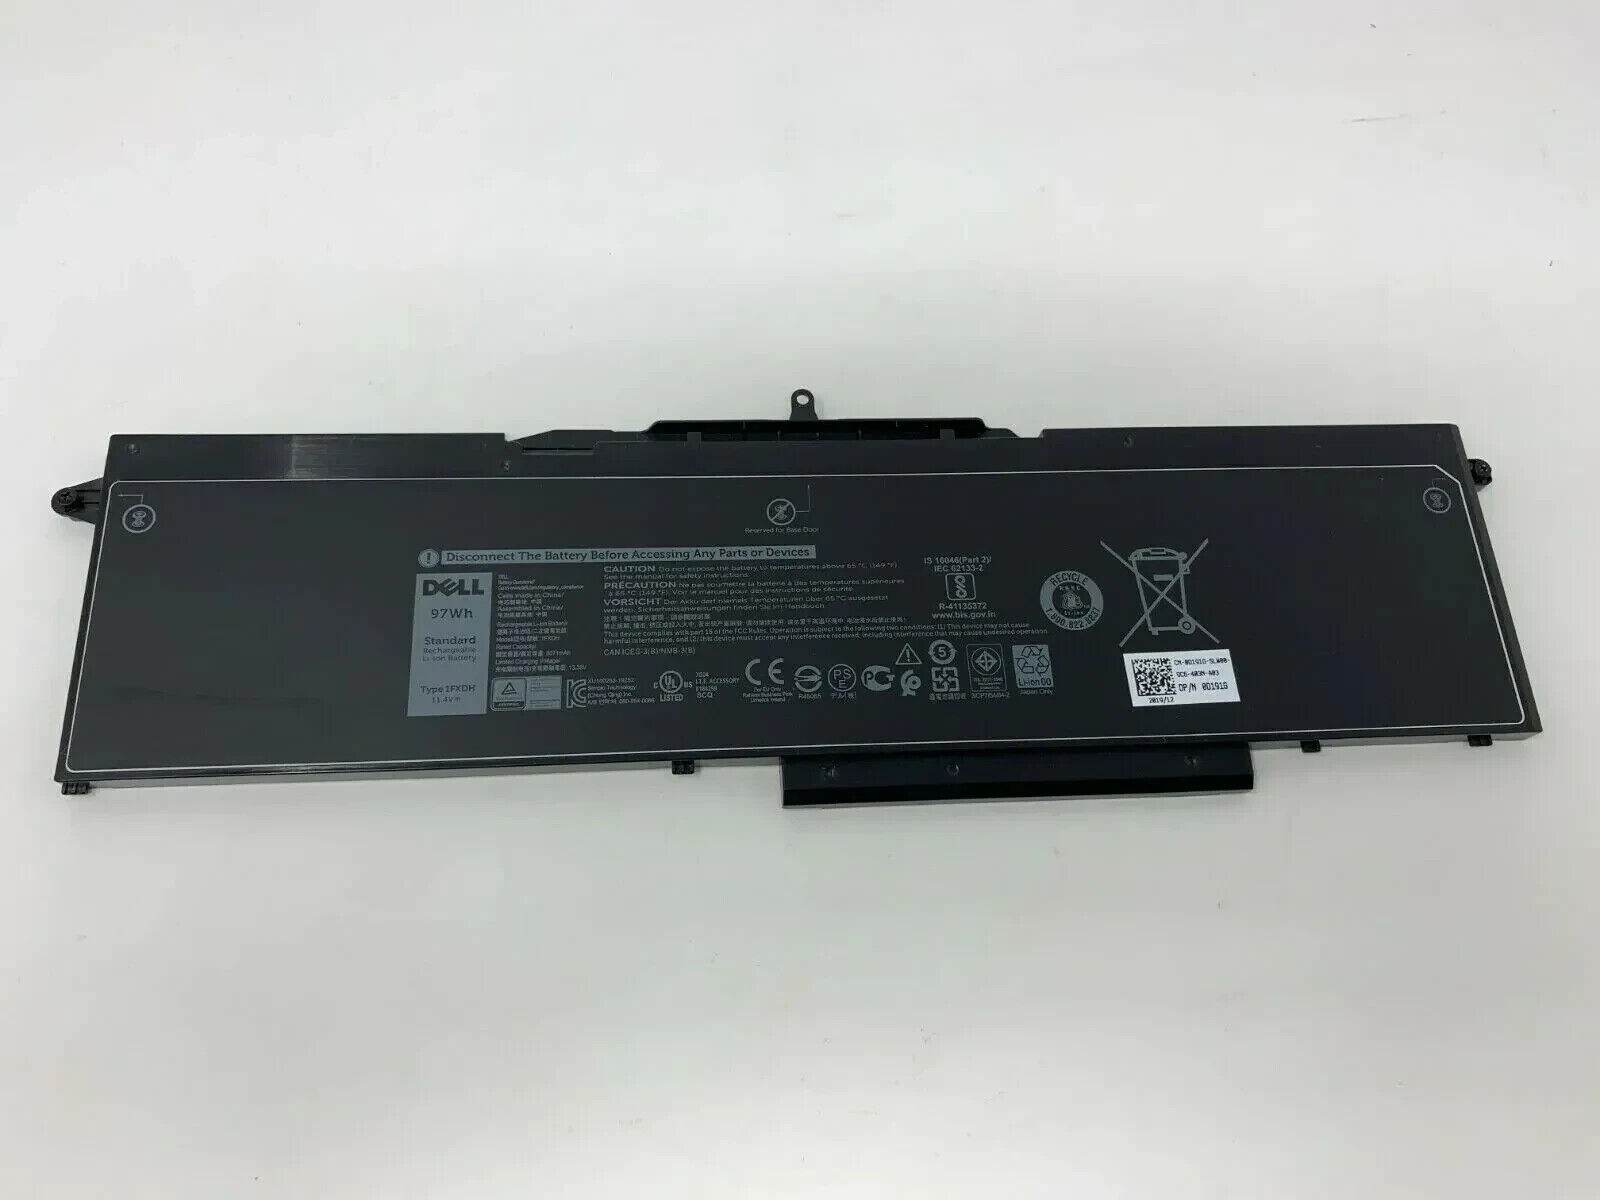 NEW Genuine Dell Precision 3541 3551 BATTERY 11.4V 97WH D191G TYPE 1FXDH